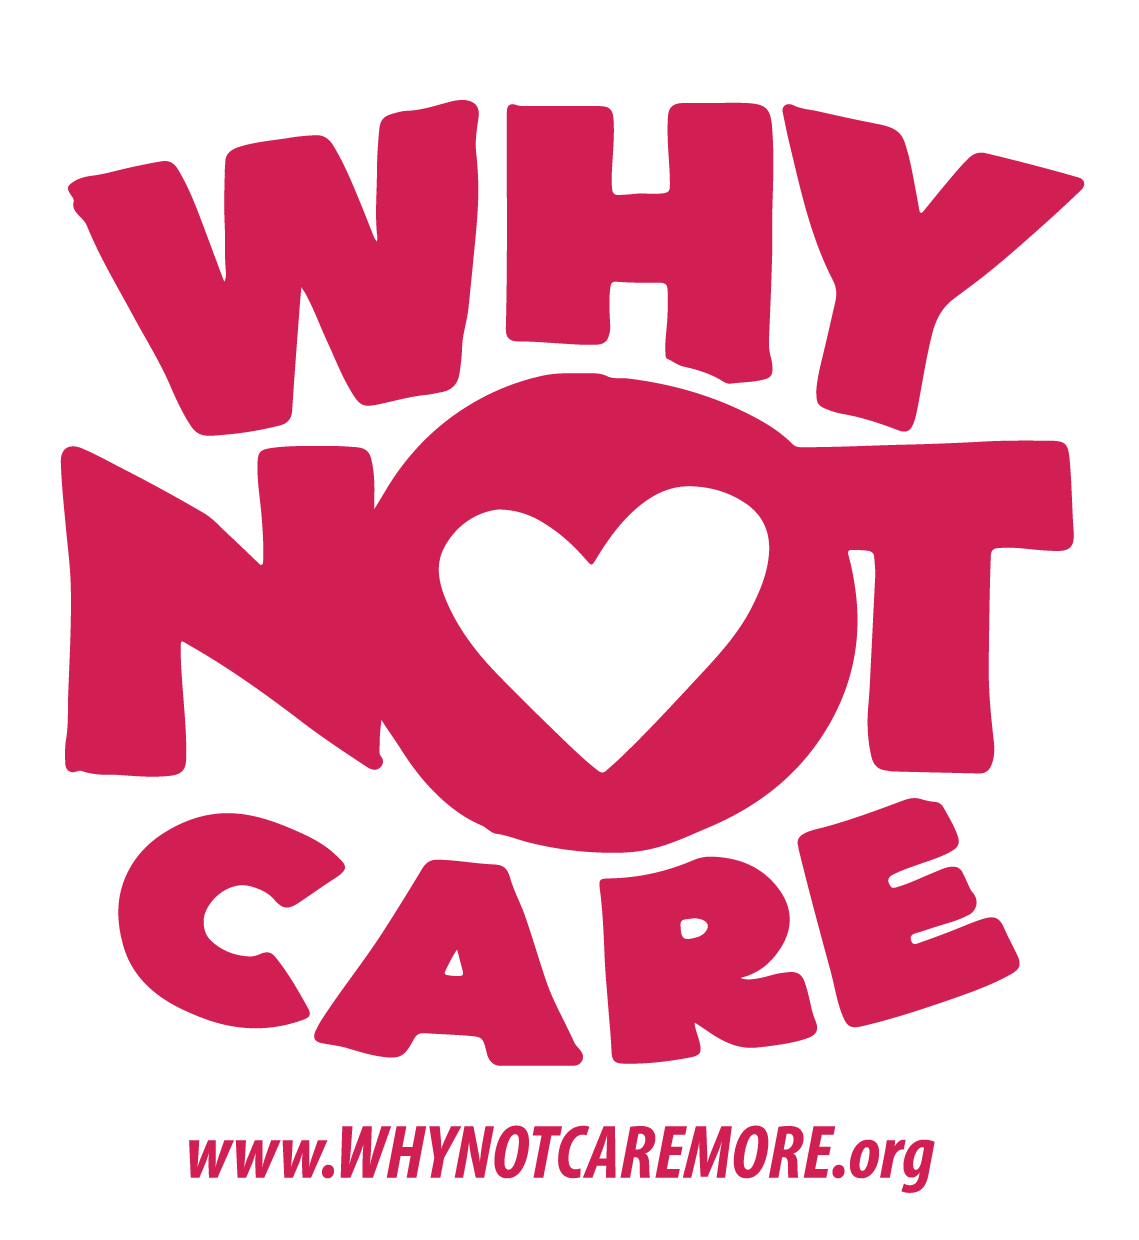 why not care, inc. logo